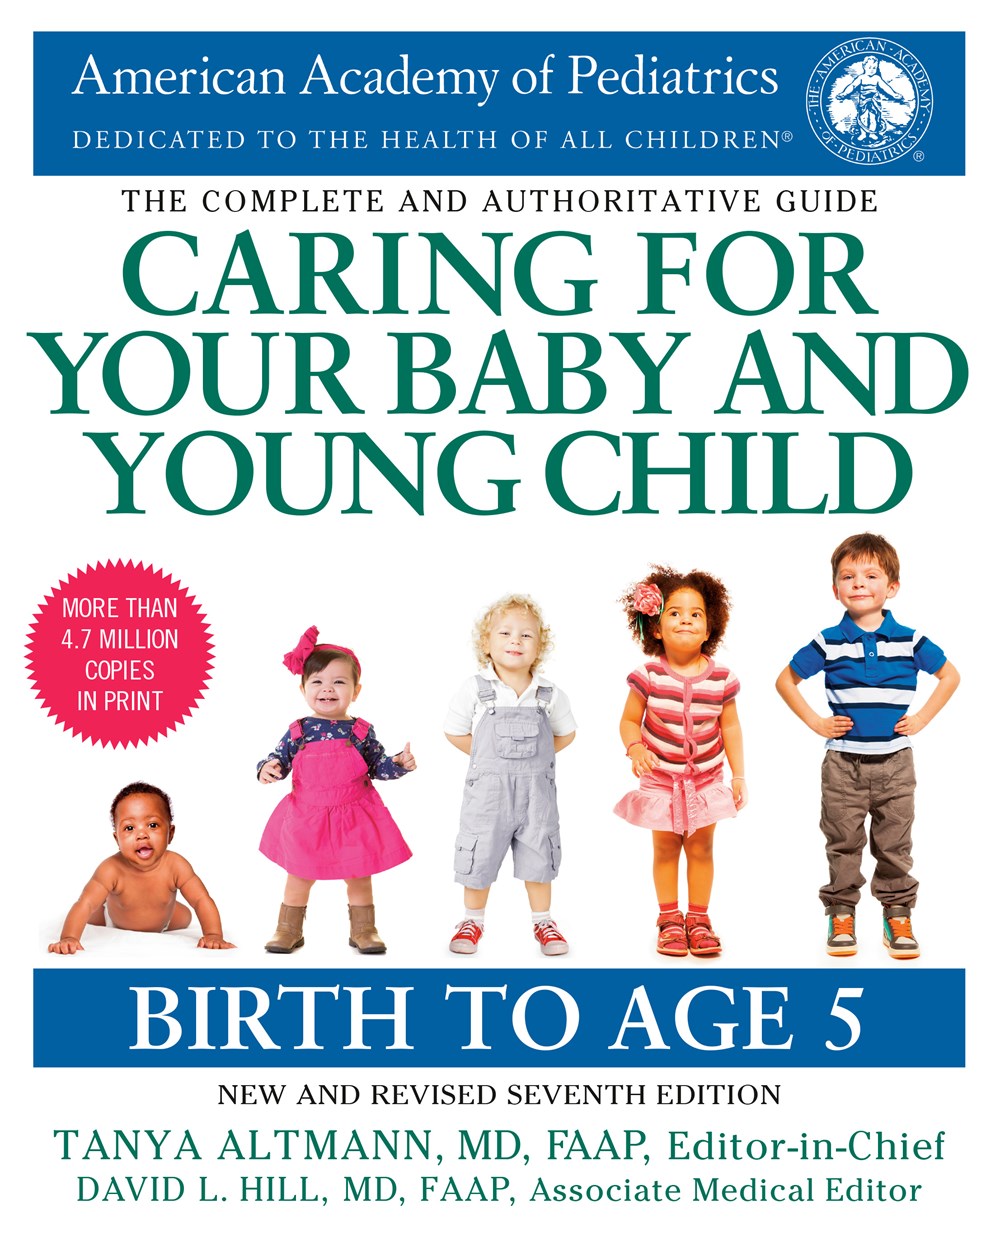 Caring for Your Baby and Young Child (7th Edition)